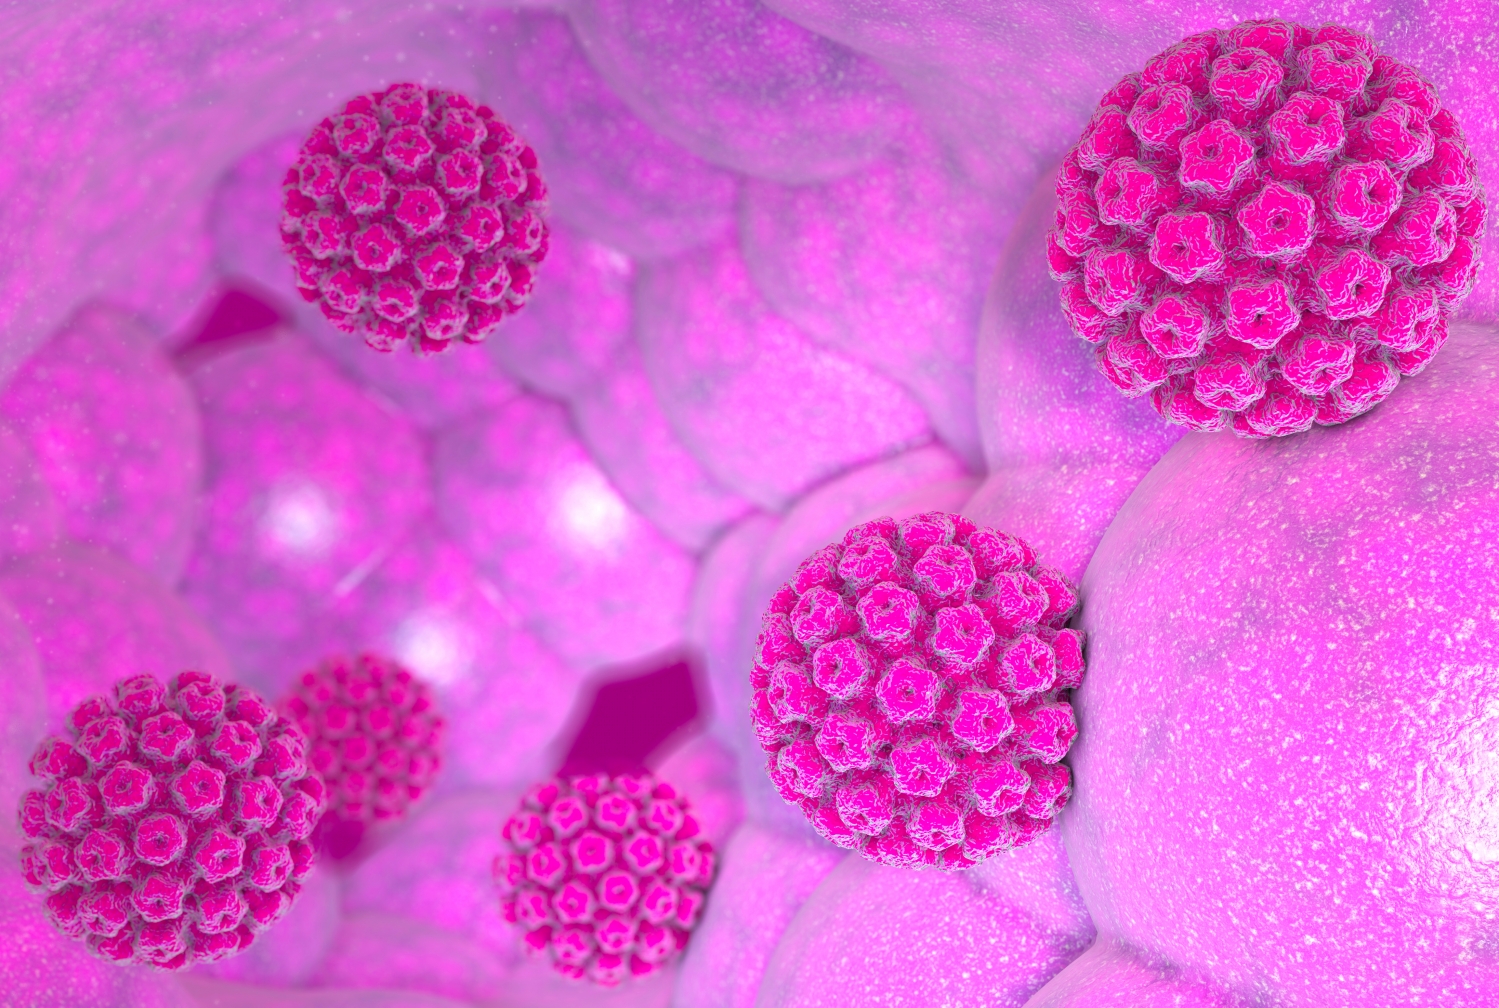 Early HPV vaccination prevents cancer